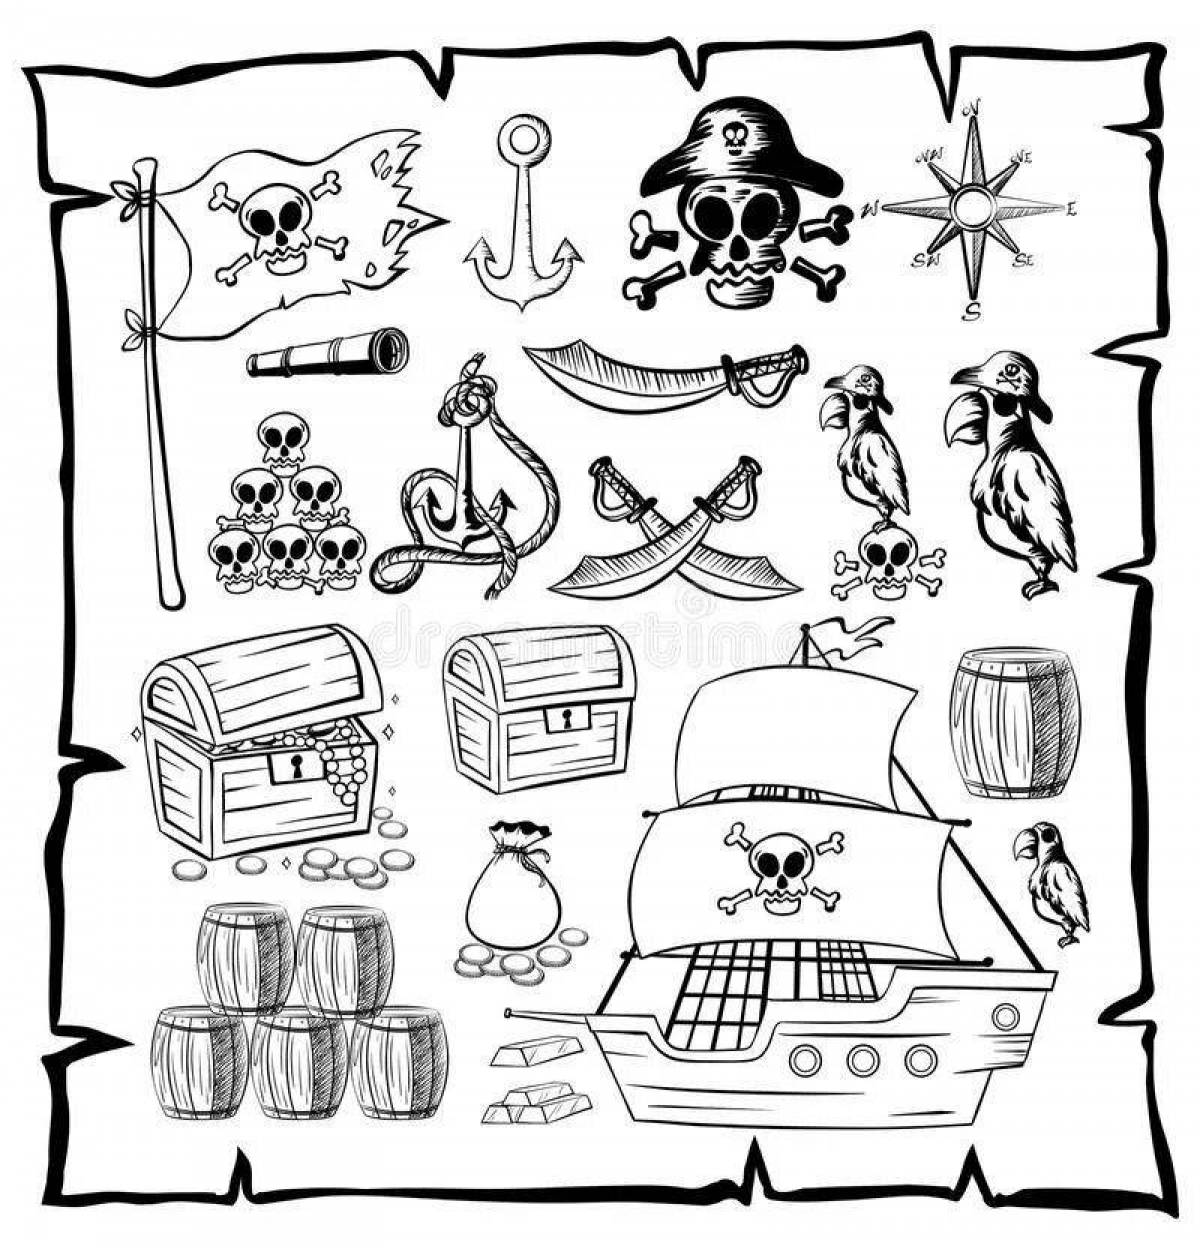 Playful pirate map coloring page